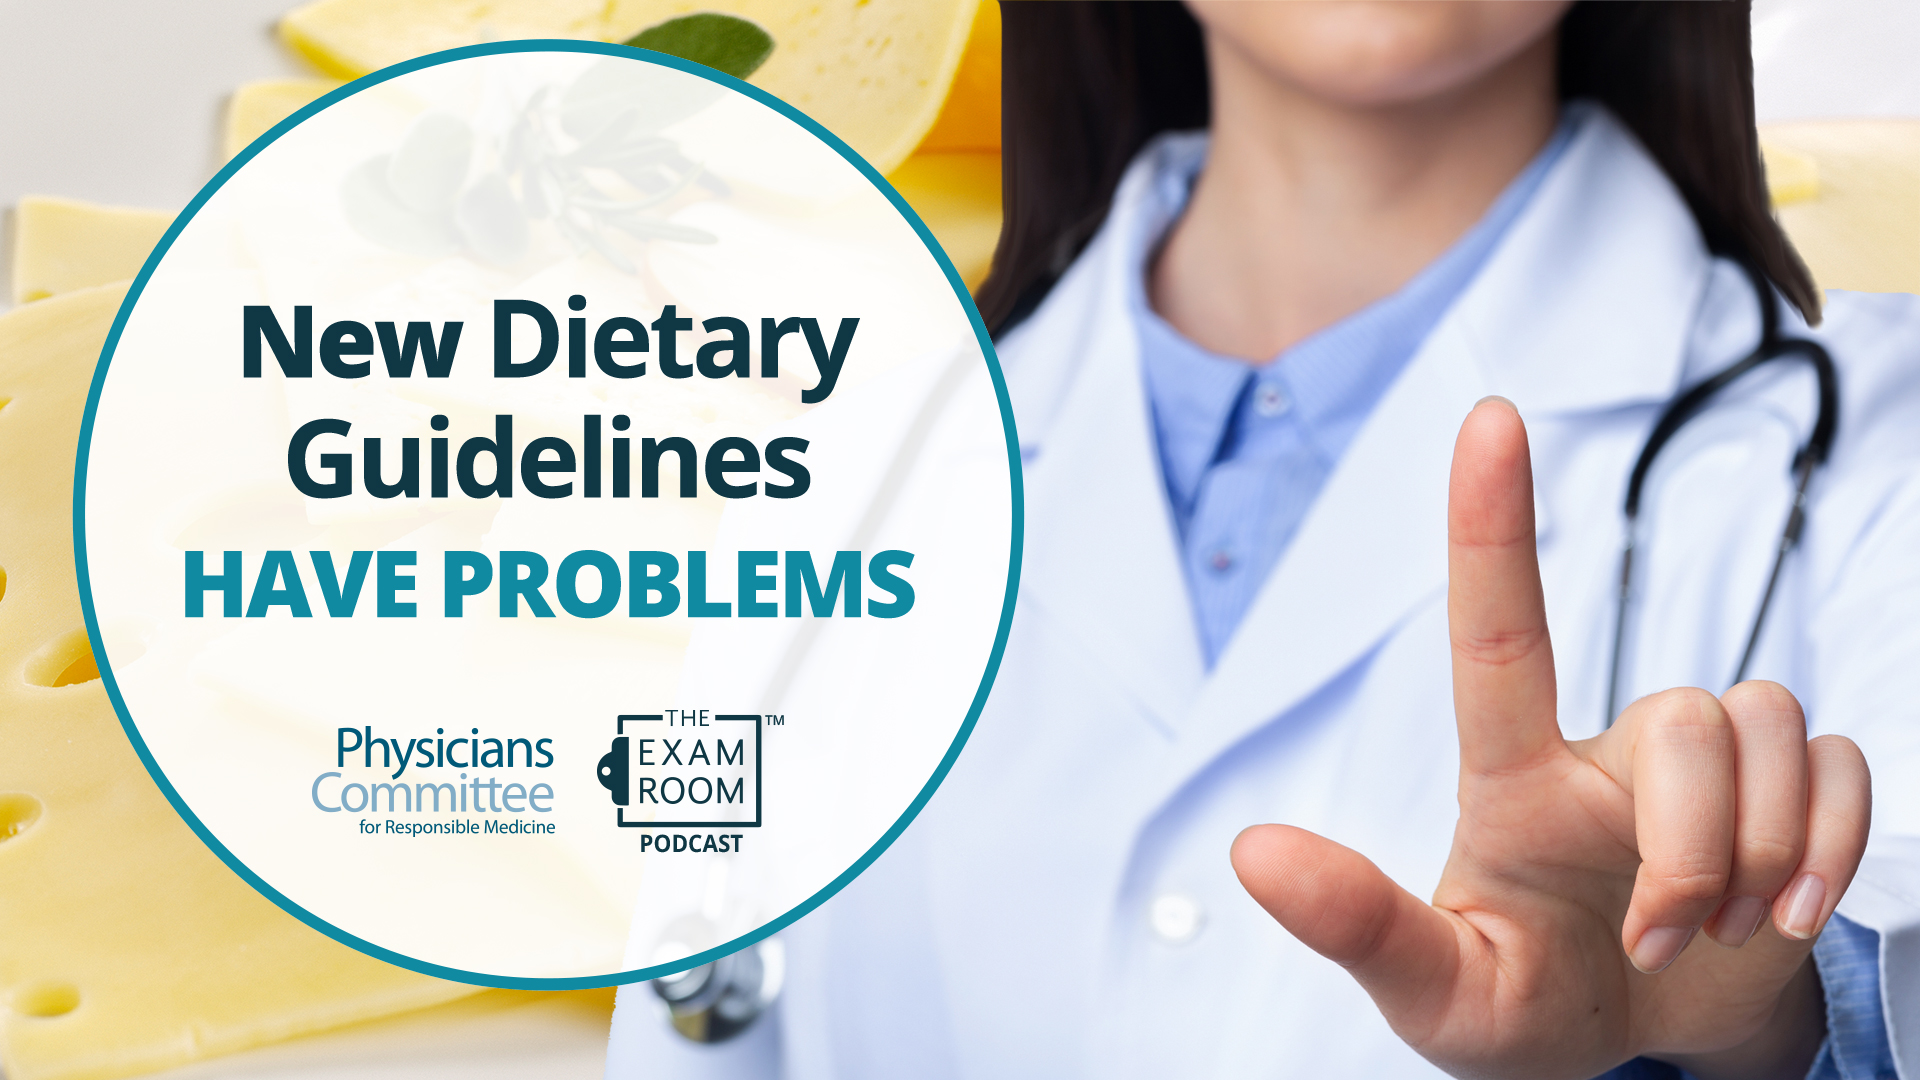 Major Problems With the New Dietary Guidelines